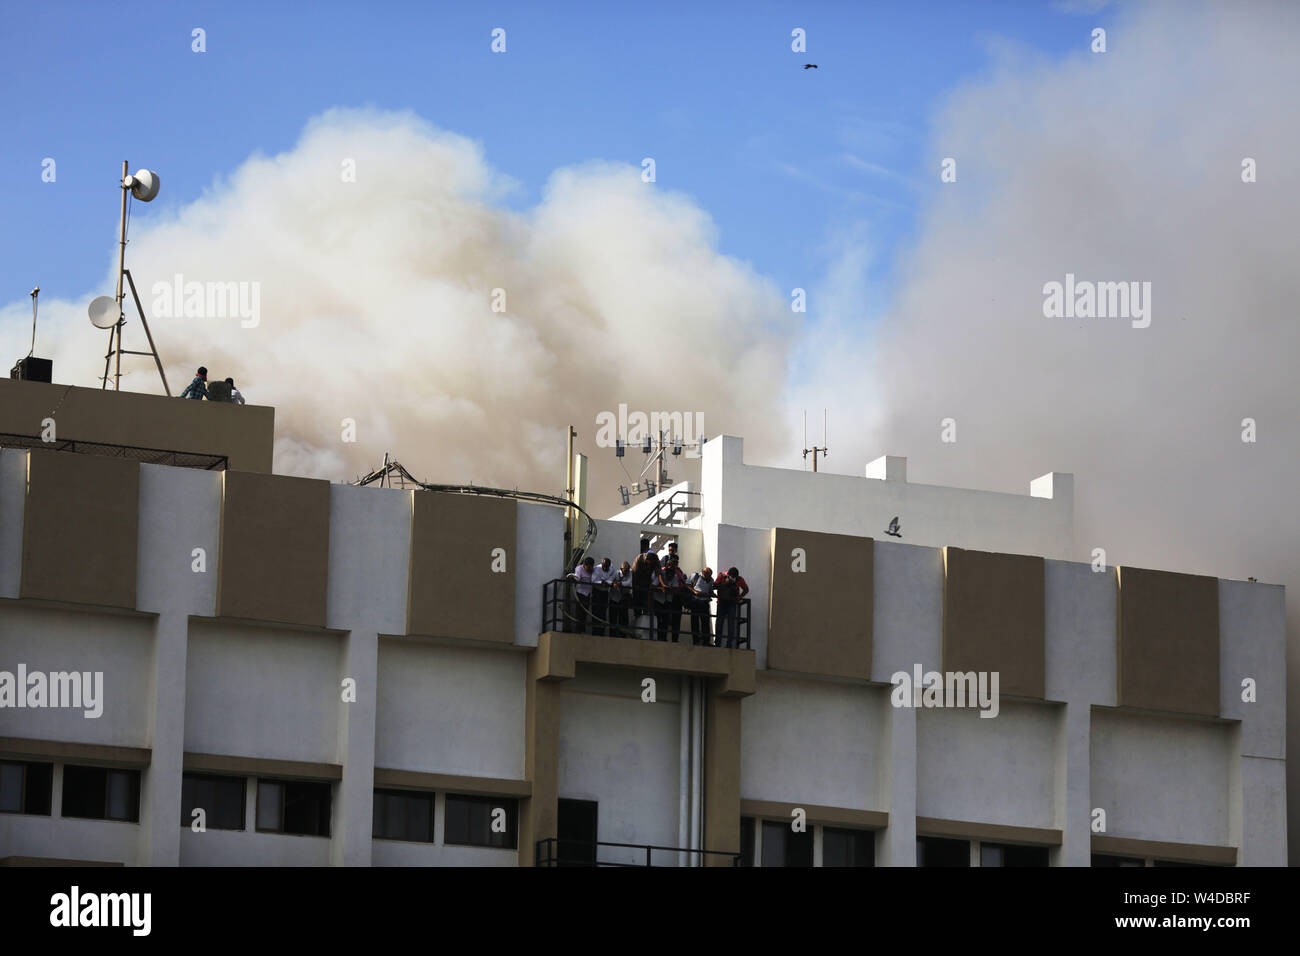 Mumbai, India. 22nd July, 2019. Indian firefighters rescue people from Mahanagar Telephone Nigam Limited (MTNL) building after a fire broke out in Mumbai, India, July 22, 2019. (Str/Xinhua) Credit: Xinhua/Alamy Live News Stock Photo